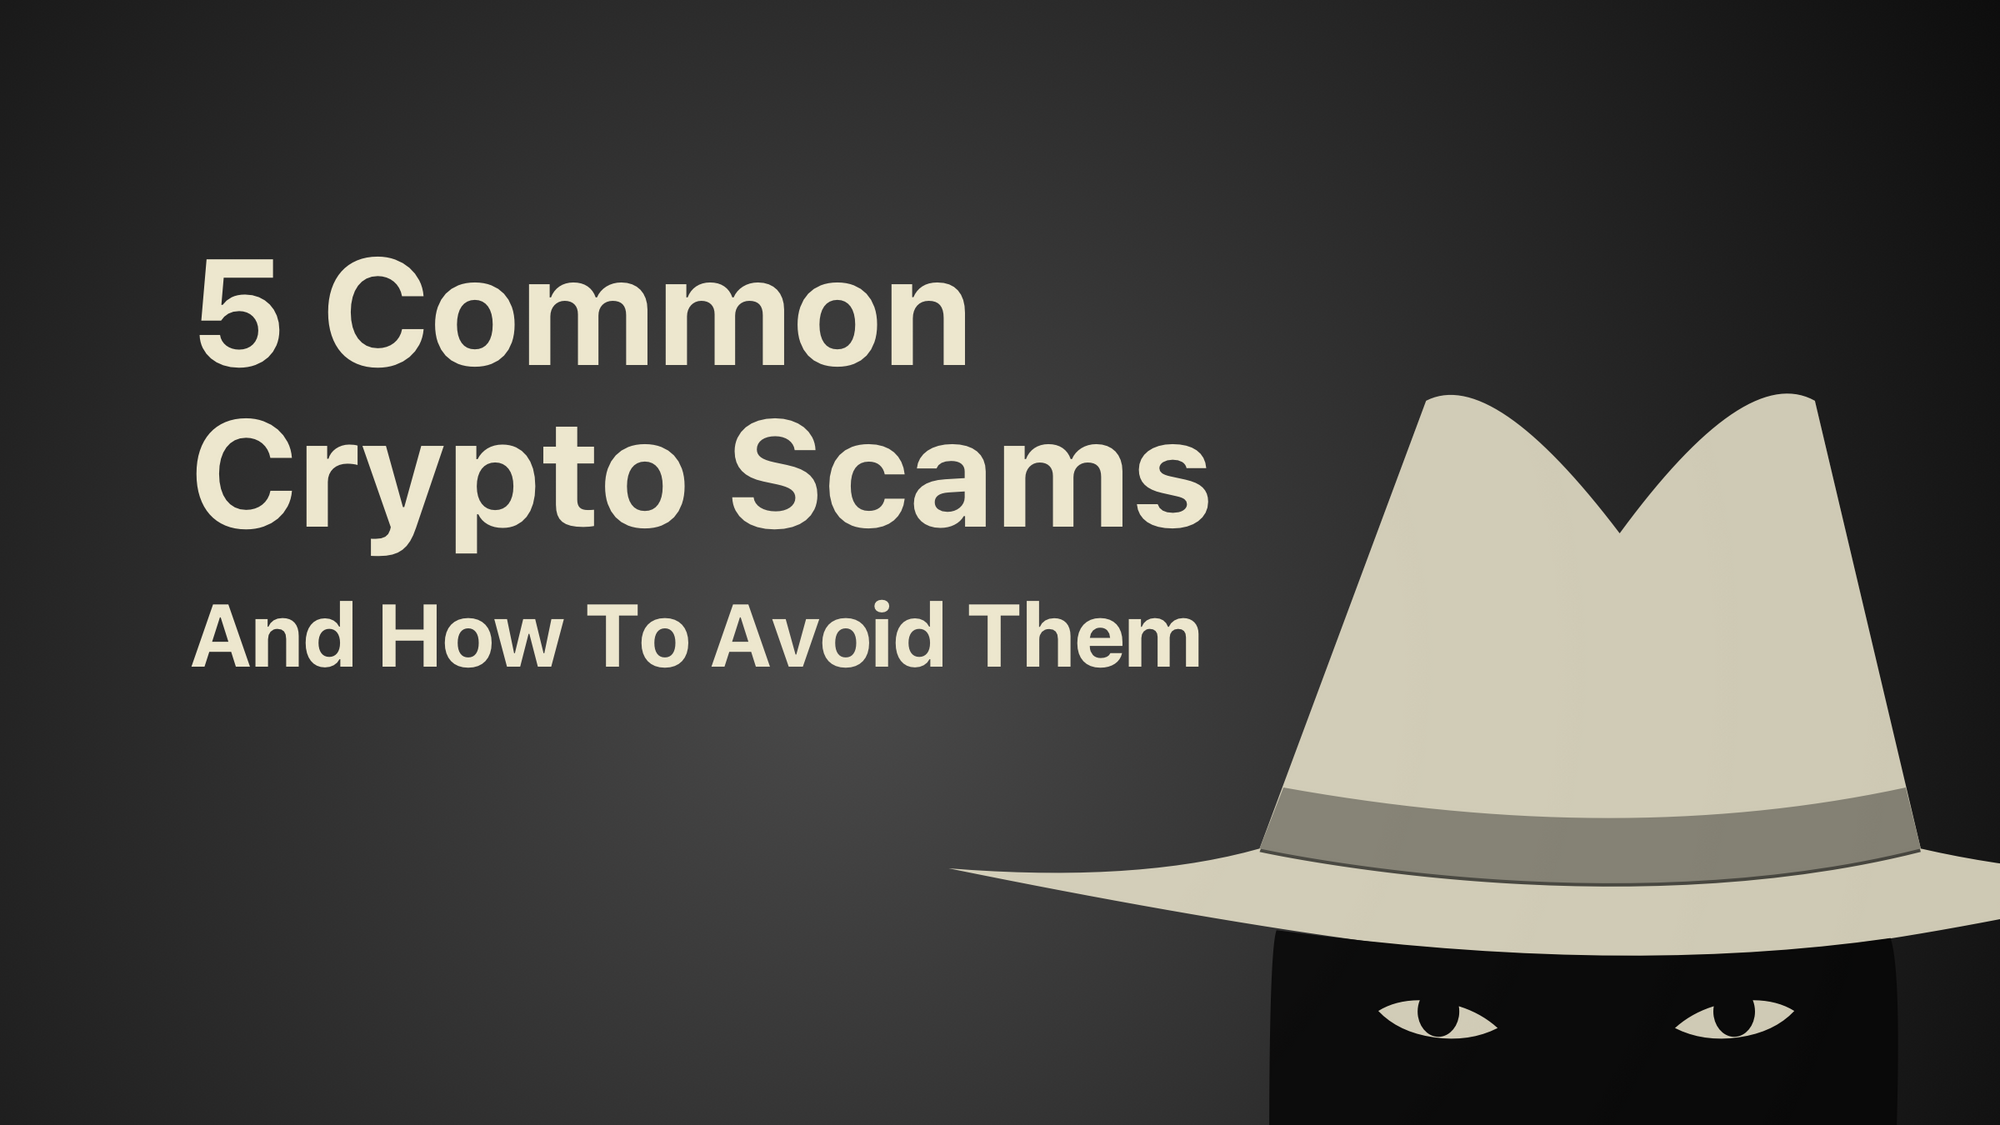 5 Common Crypto Scams And How To Avoid Them